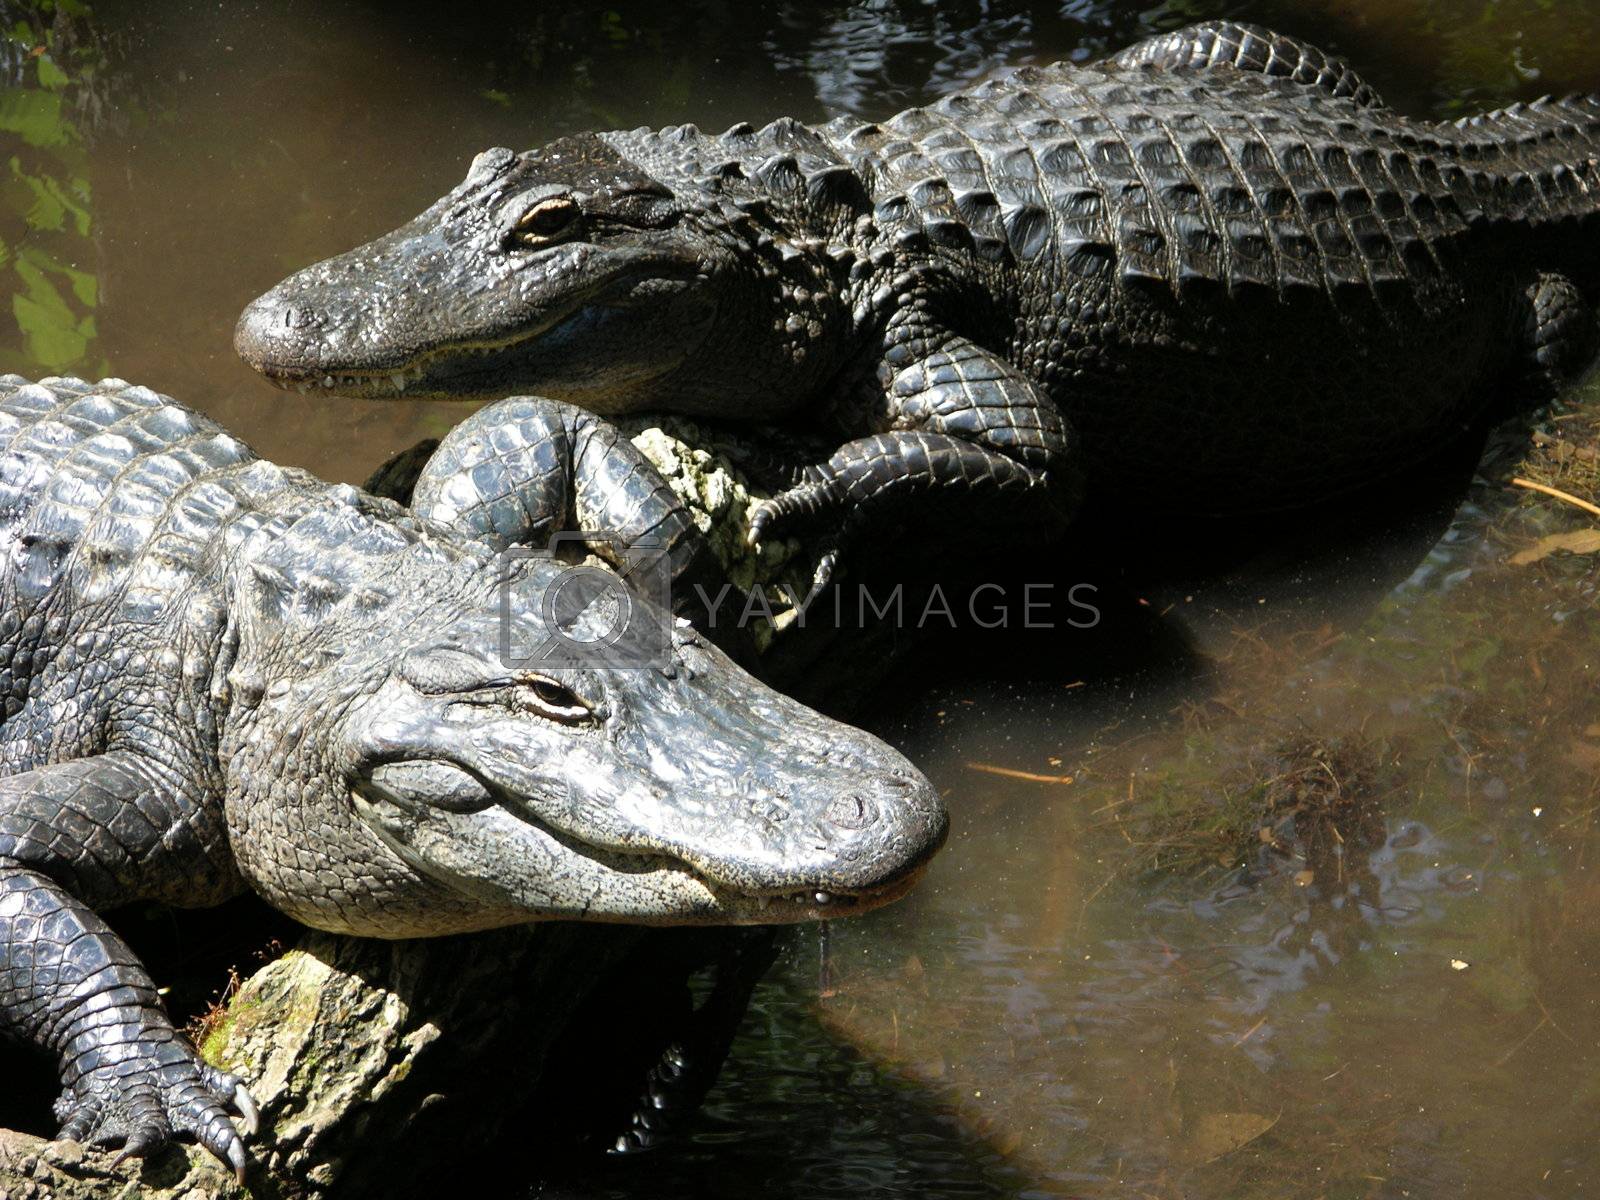 Royalty free image of two alligators by CLHeesen